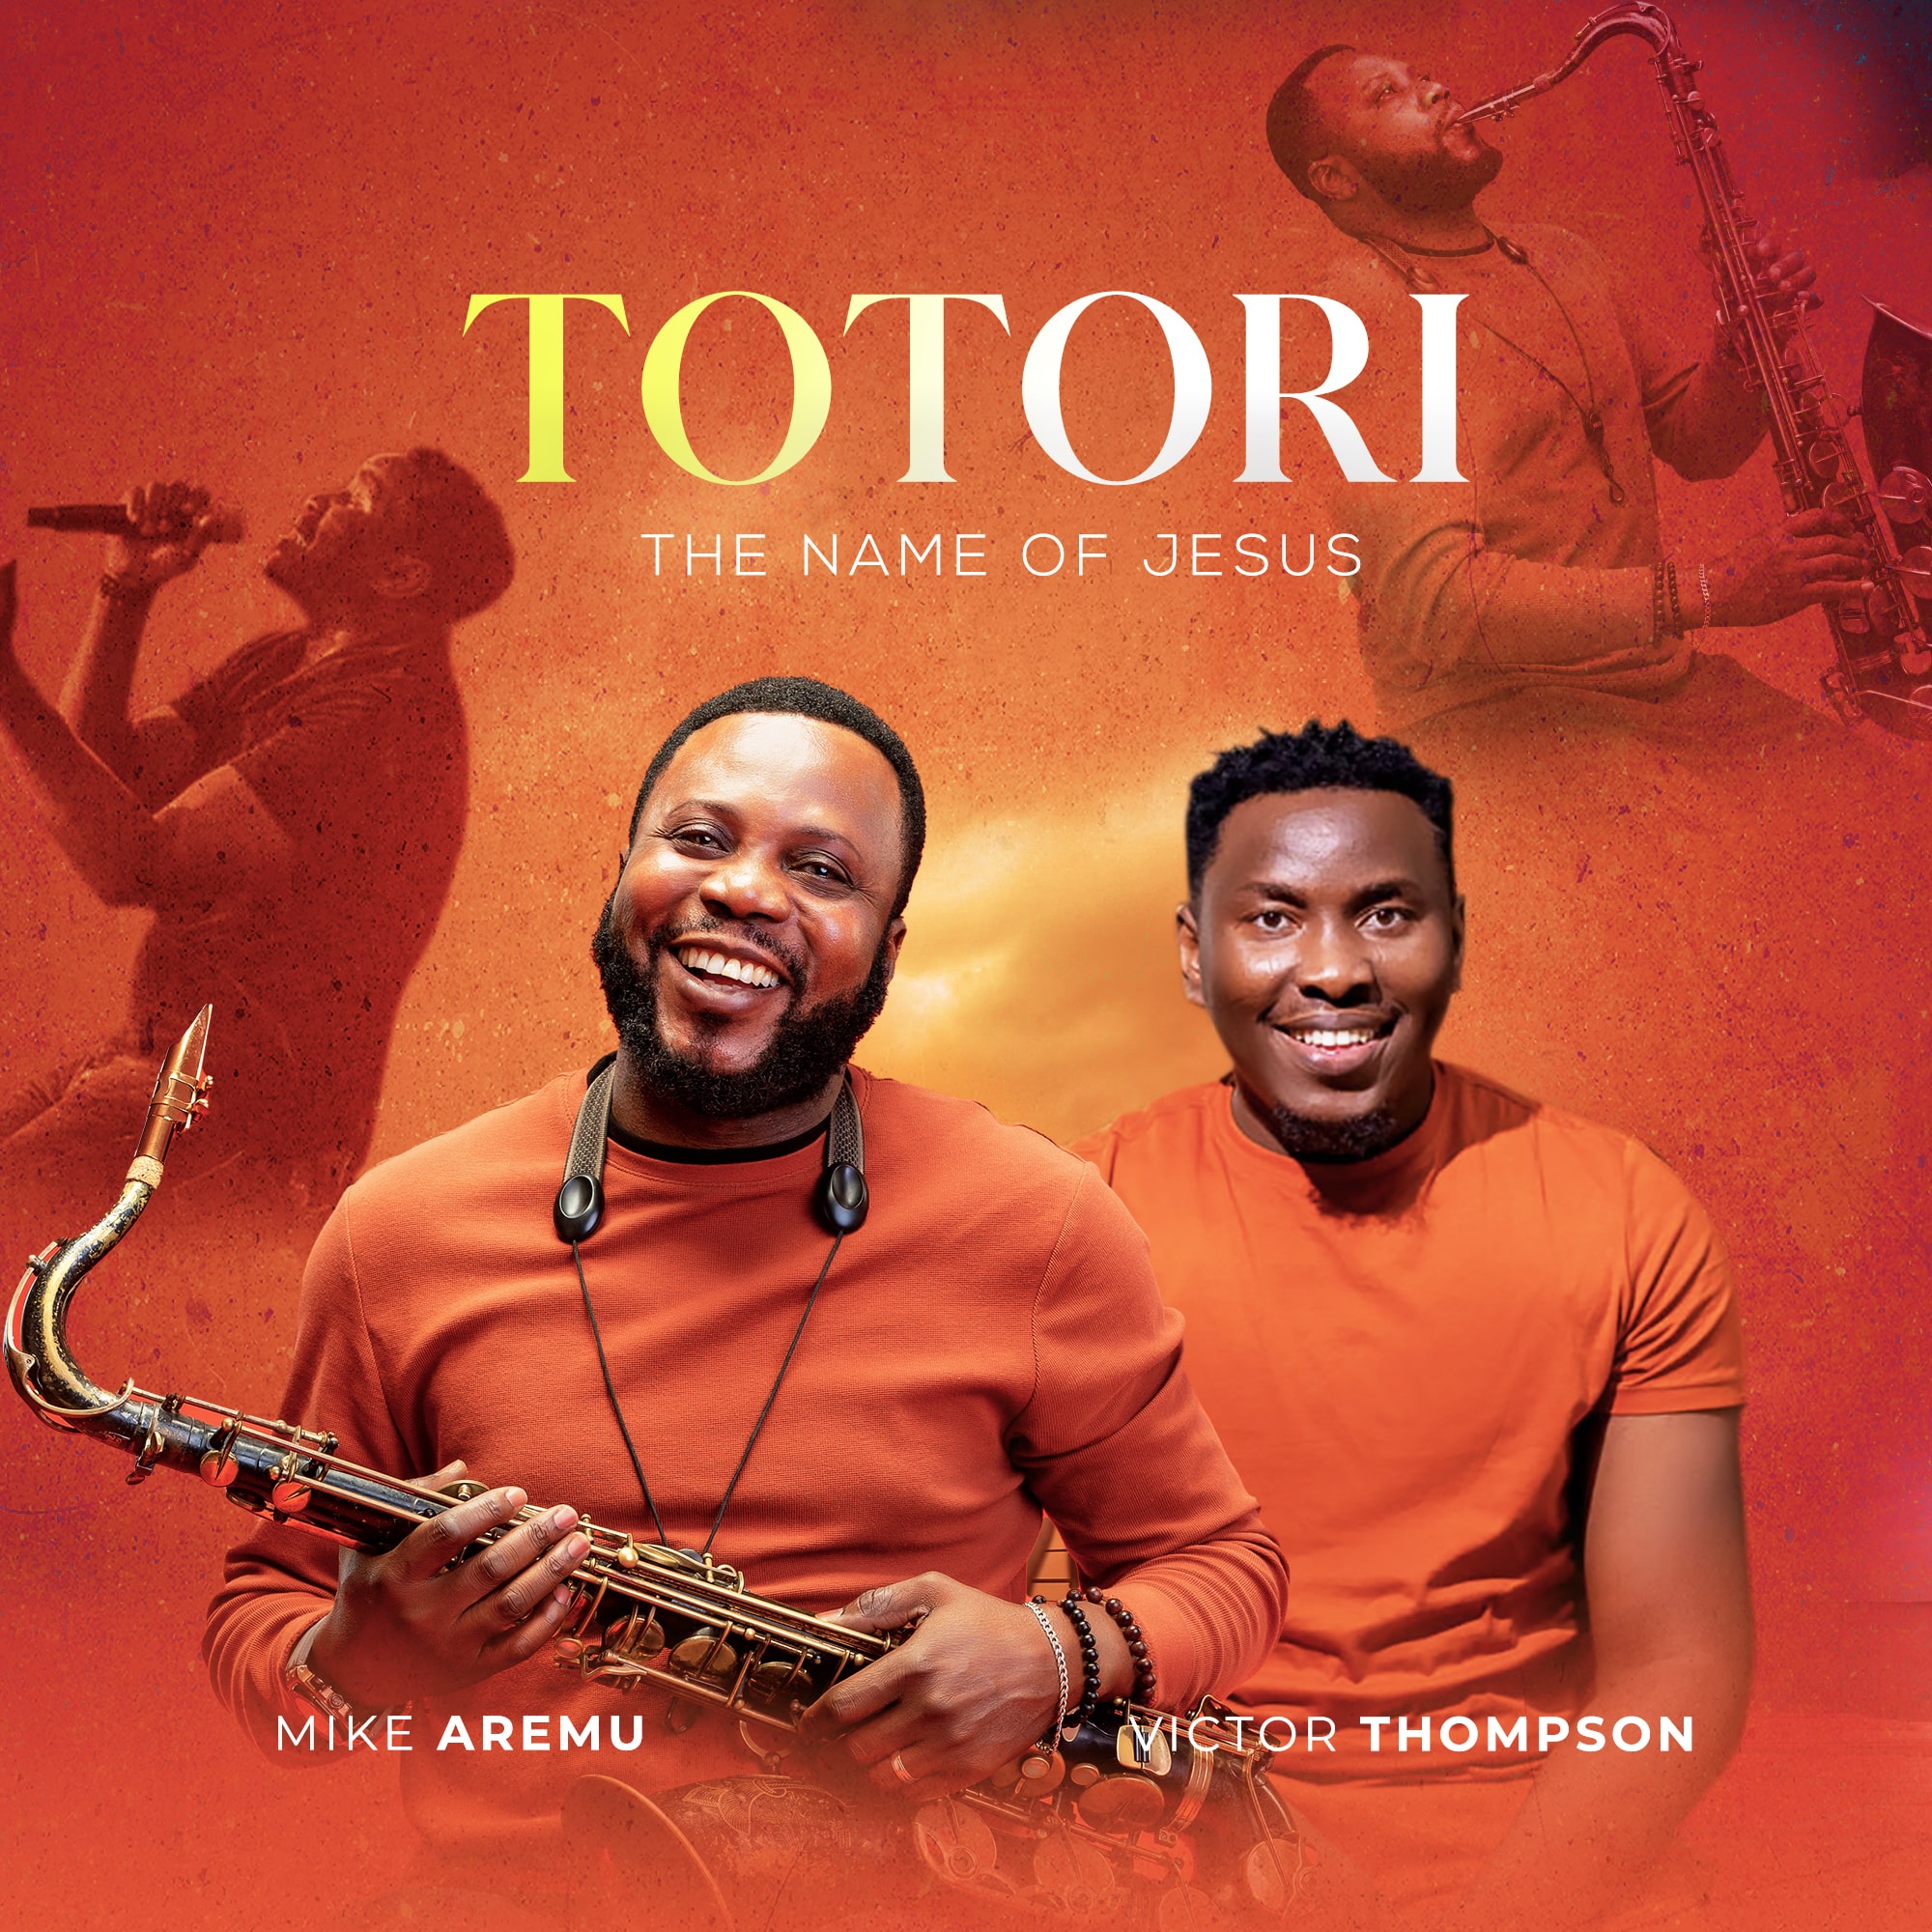 Totori The Name of Jesus by Mike Aremu